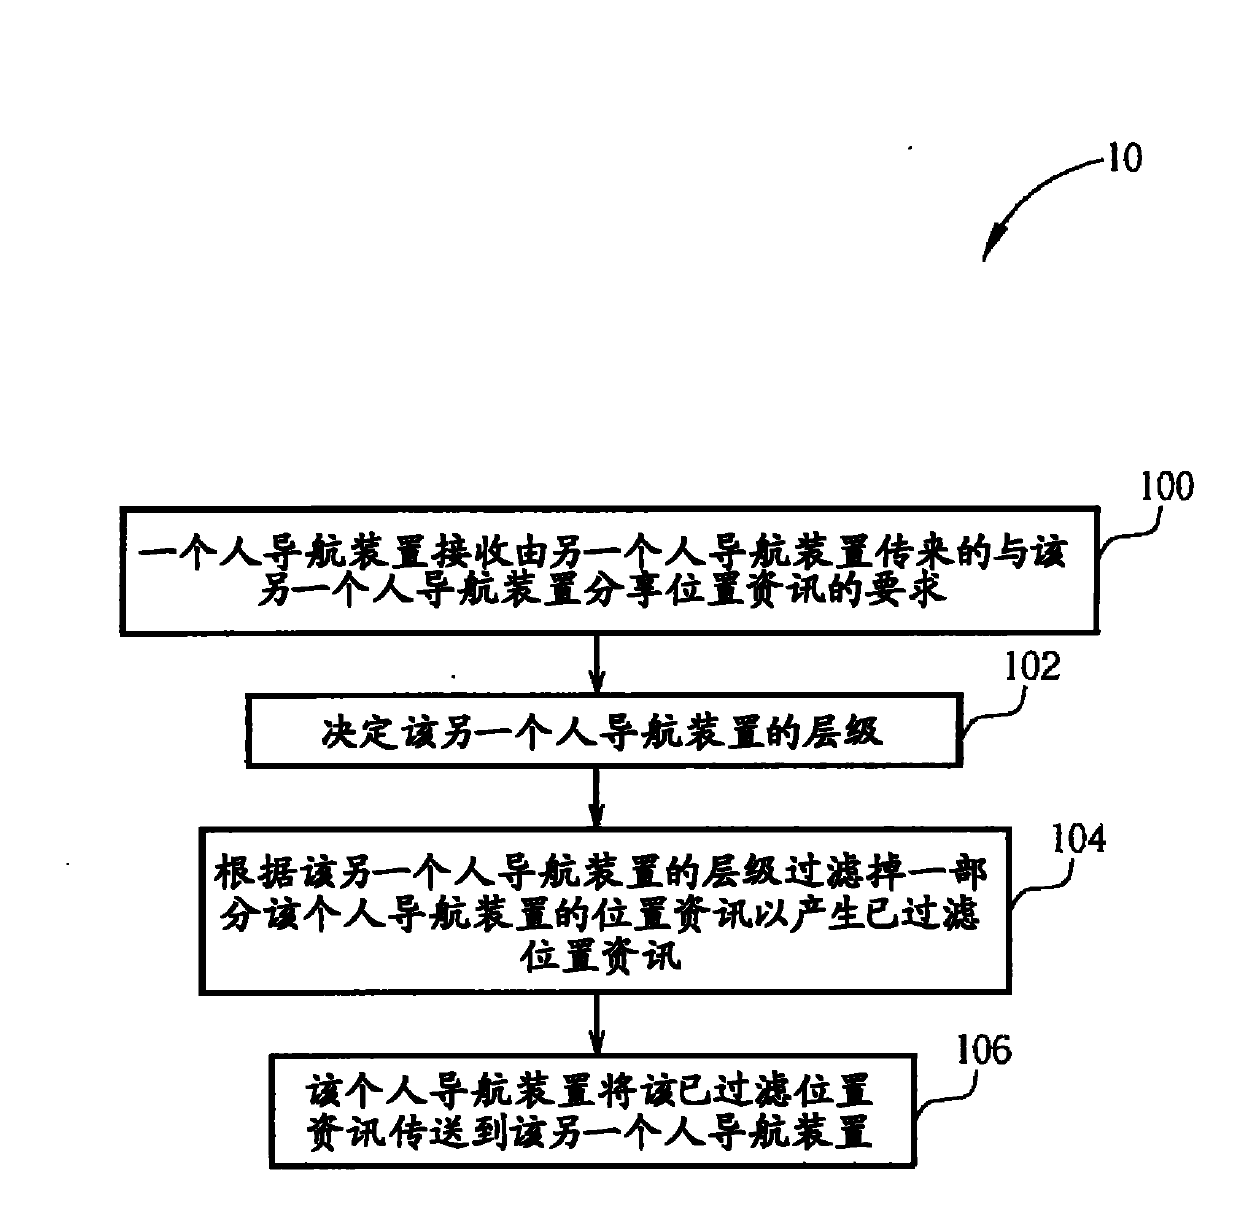 Method for sharing location information by one personal navigation device with another personal navigation device